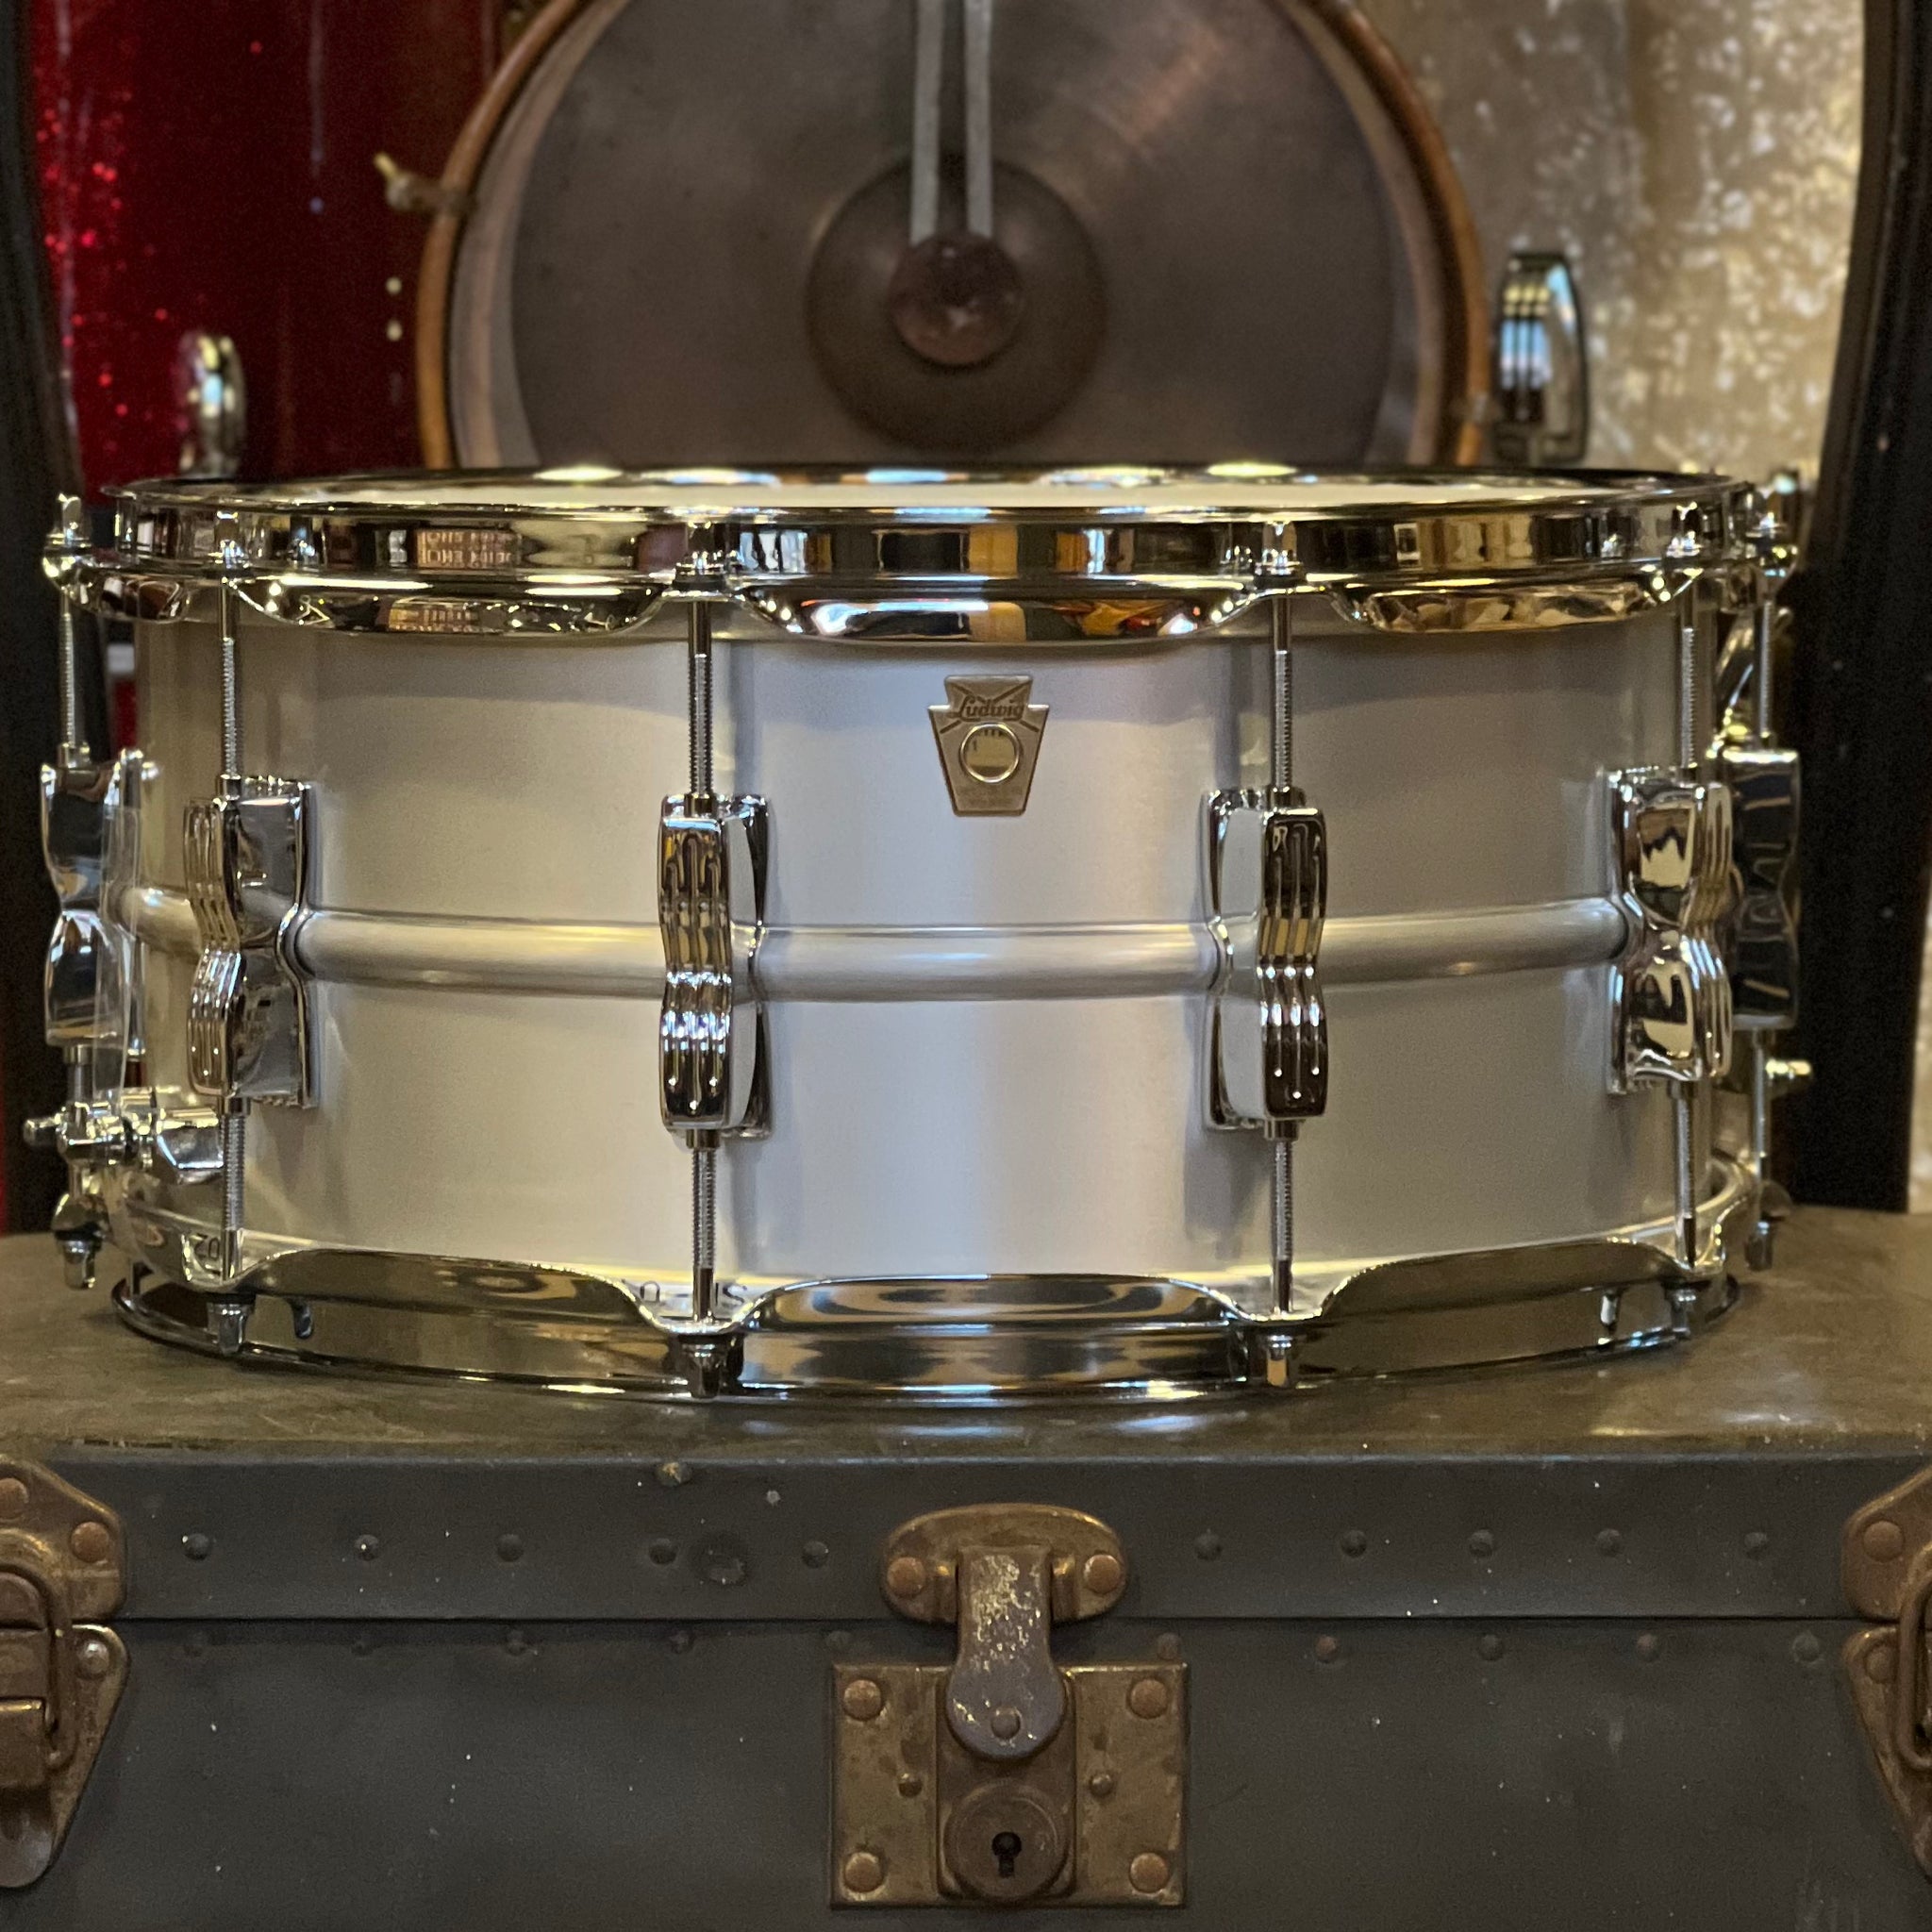 NEW Ludwig 6.5x14 Acrolite Brushed Aluminum Snare Drum w/ P86C Throw-Off